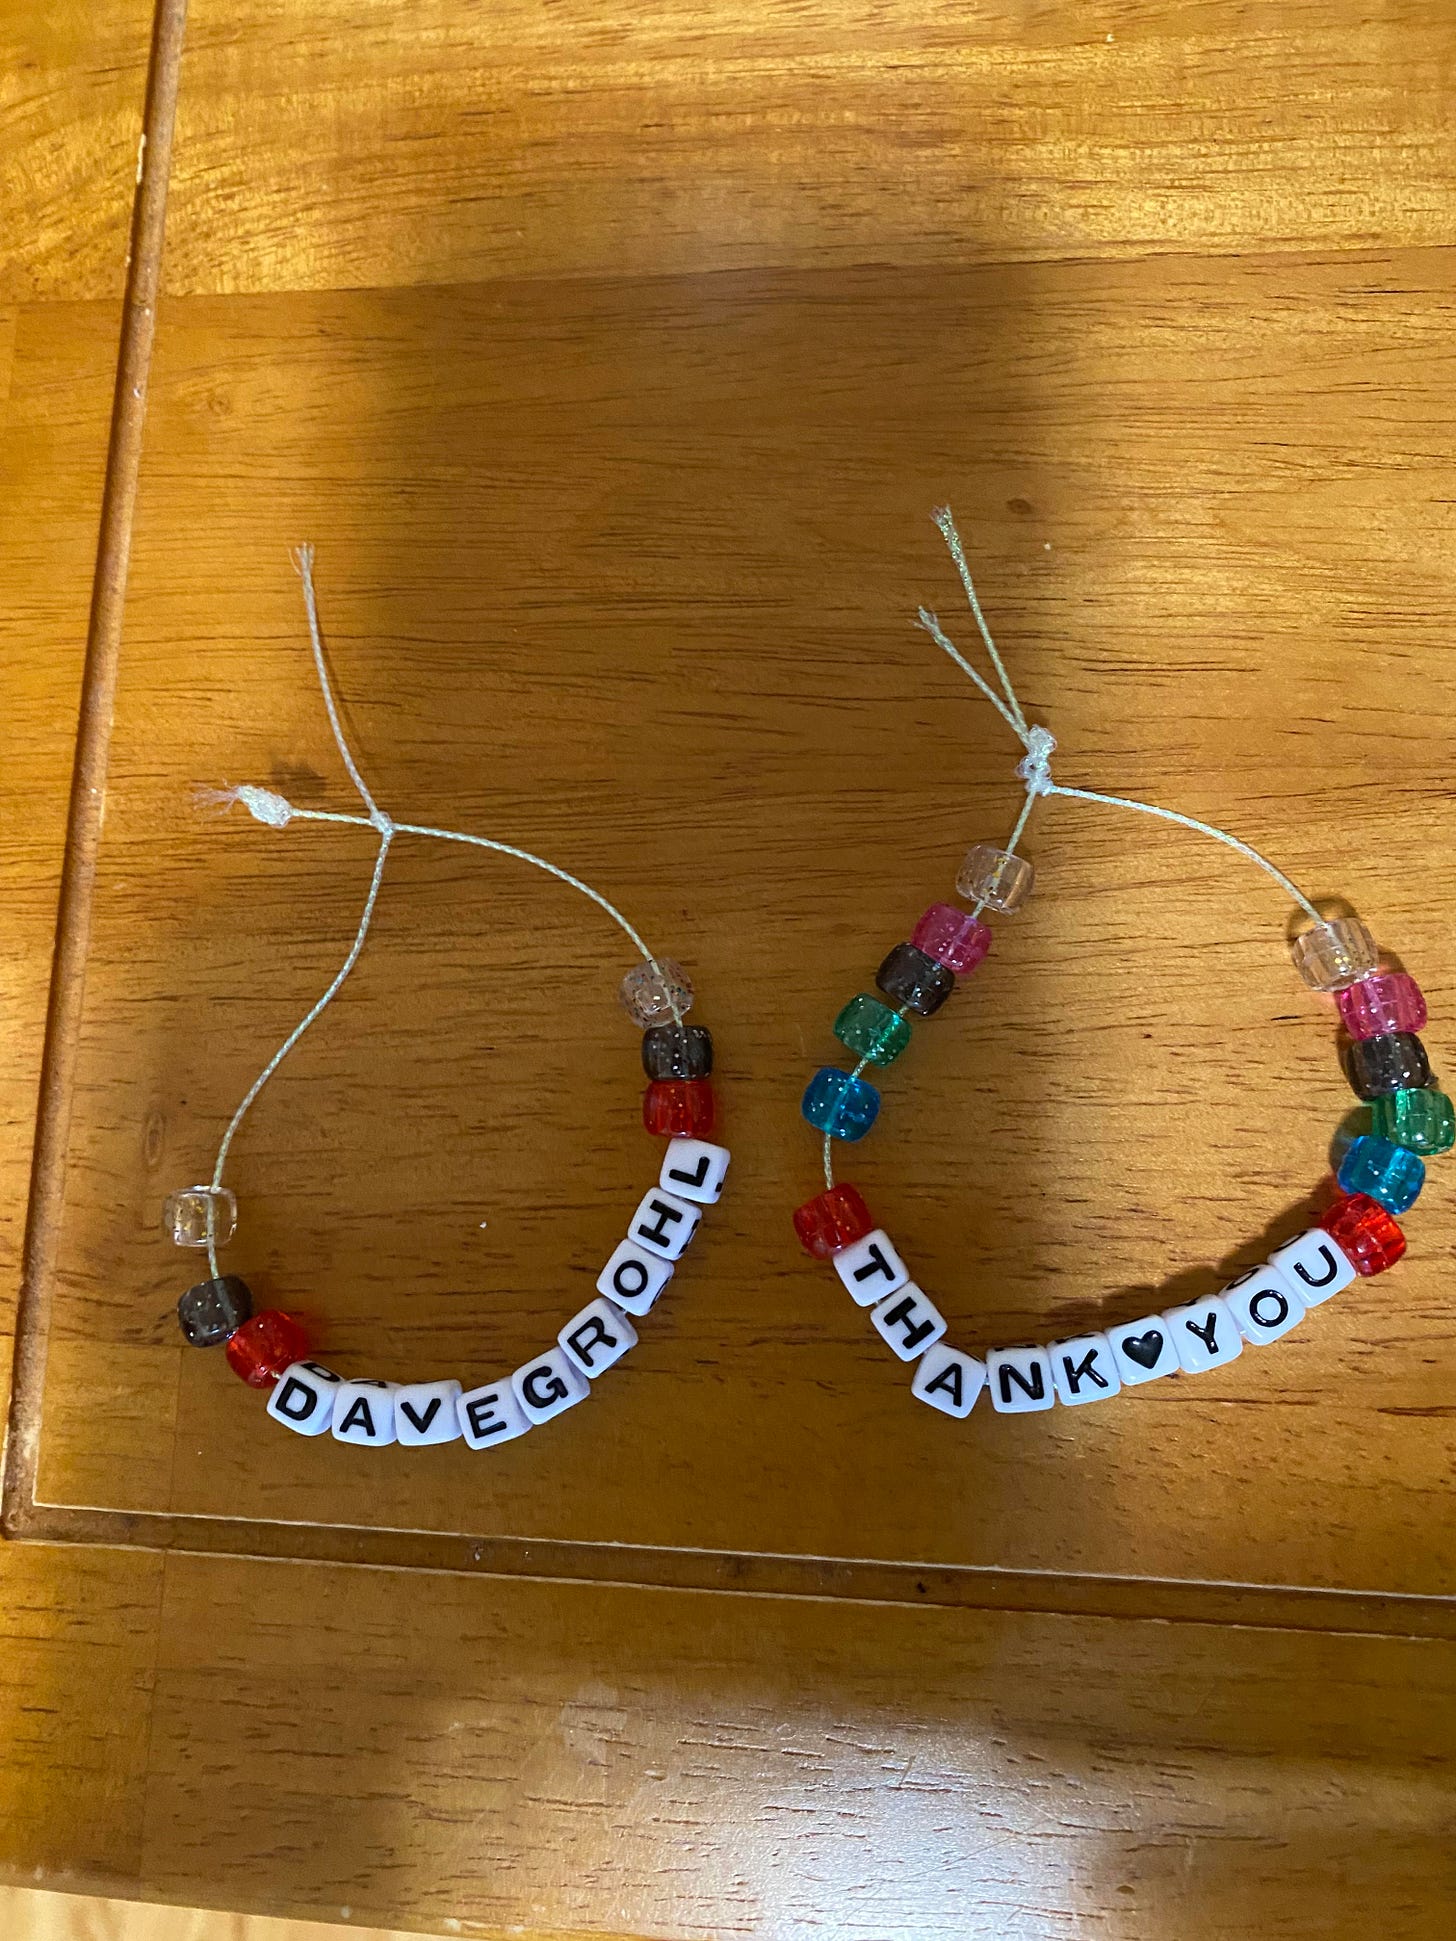 Sarah's friendship bracelets that say "Dave Grohl" and "Thank you."